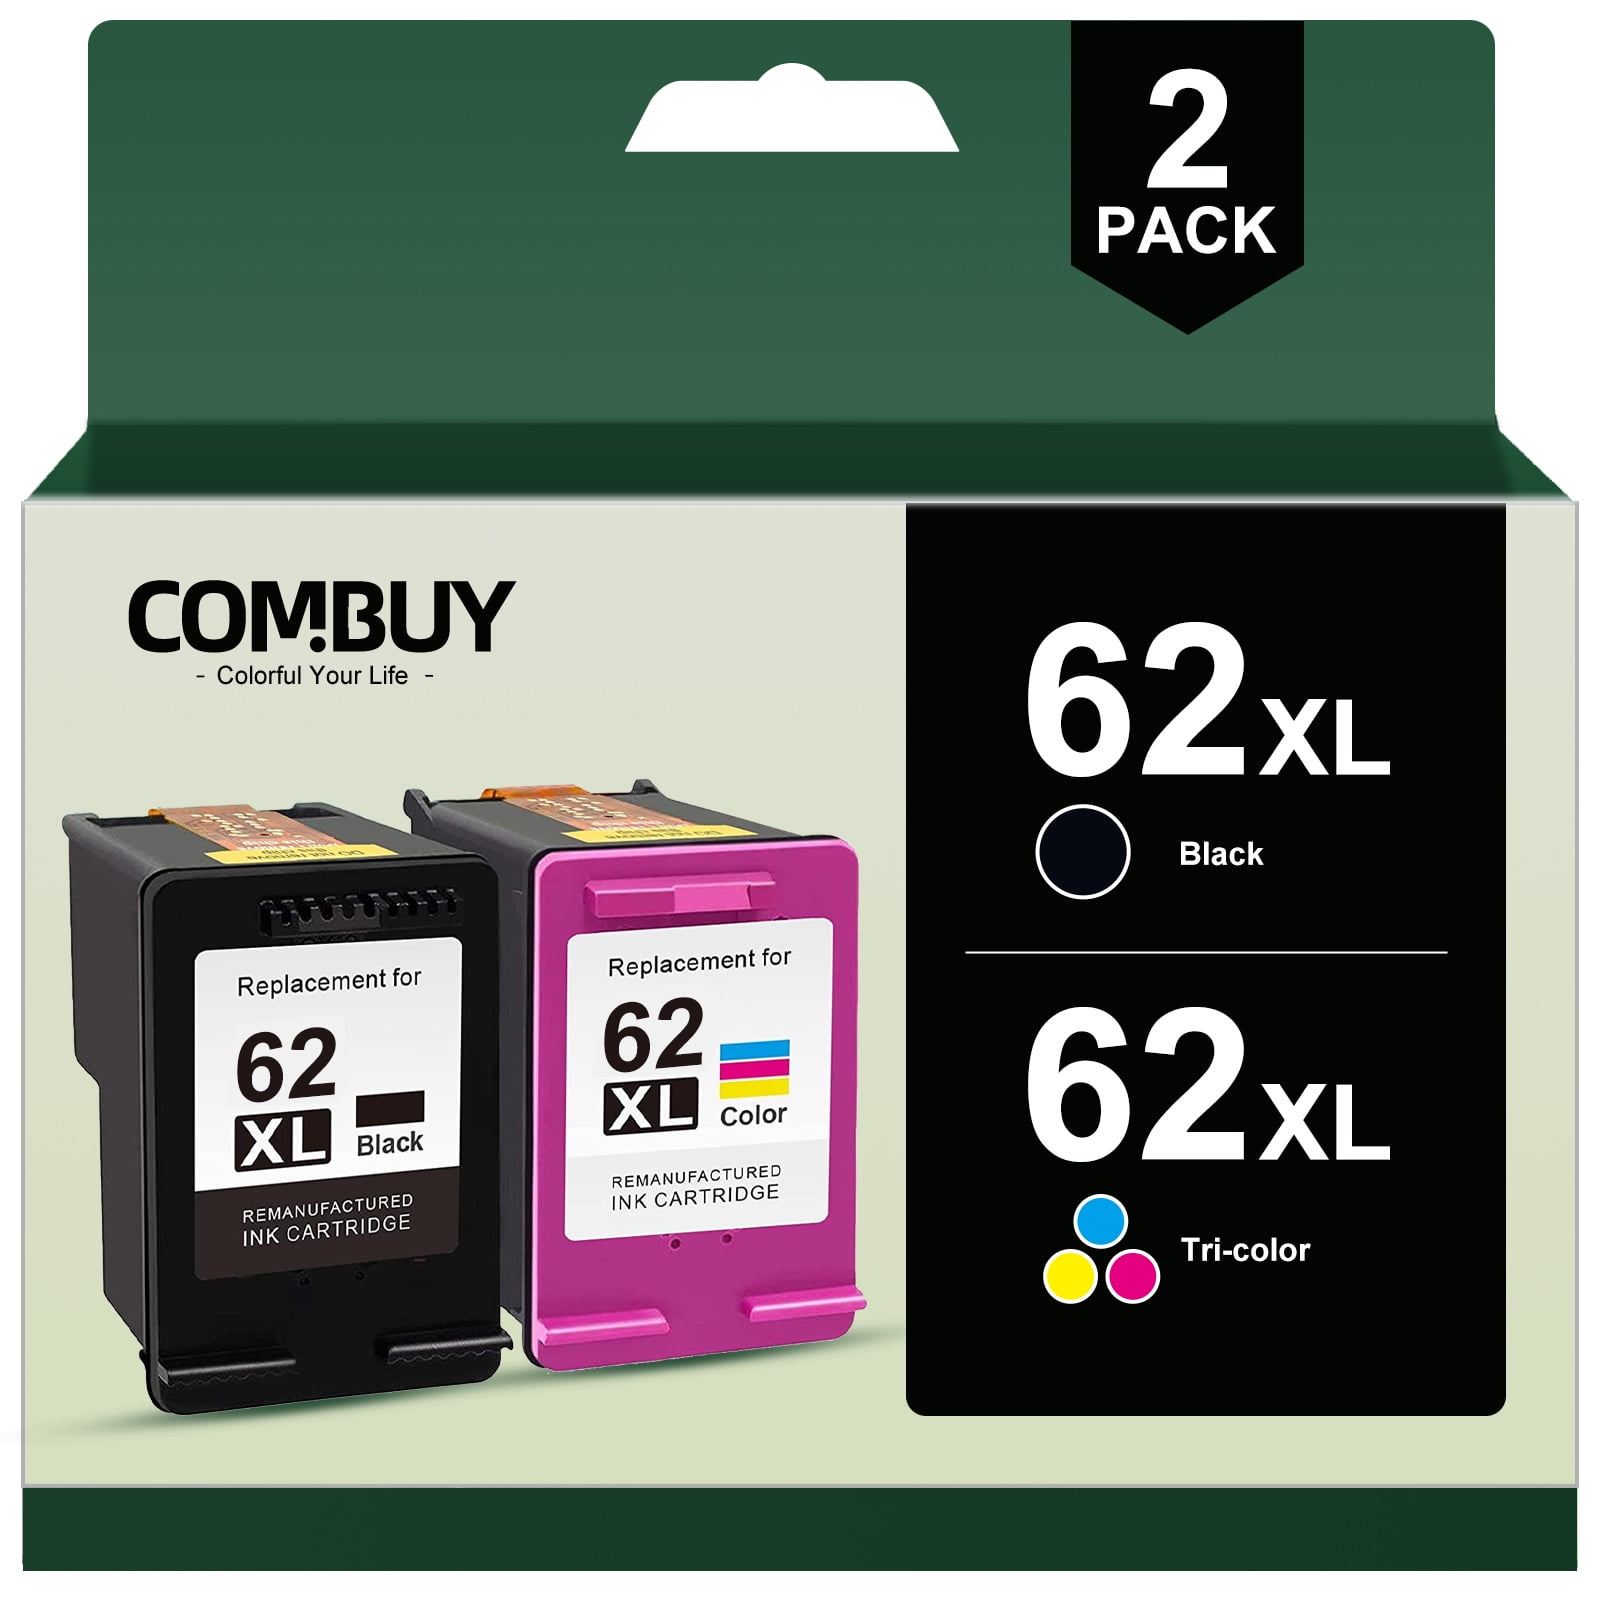 Economink Remanufactured 62 Black Ink Cartridge Replacement for HP 62XL  High Yield to use for Envy 7640 5660 5540 7645 7644 5643 5640 5661 5642  7643